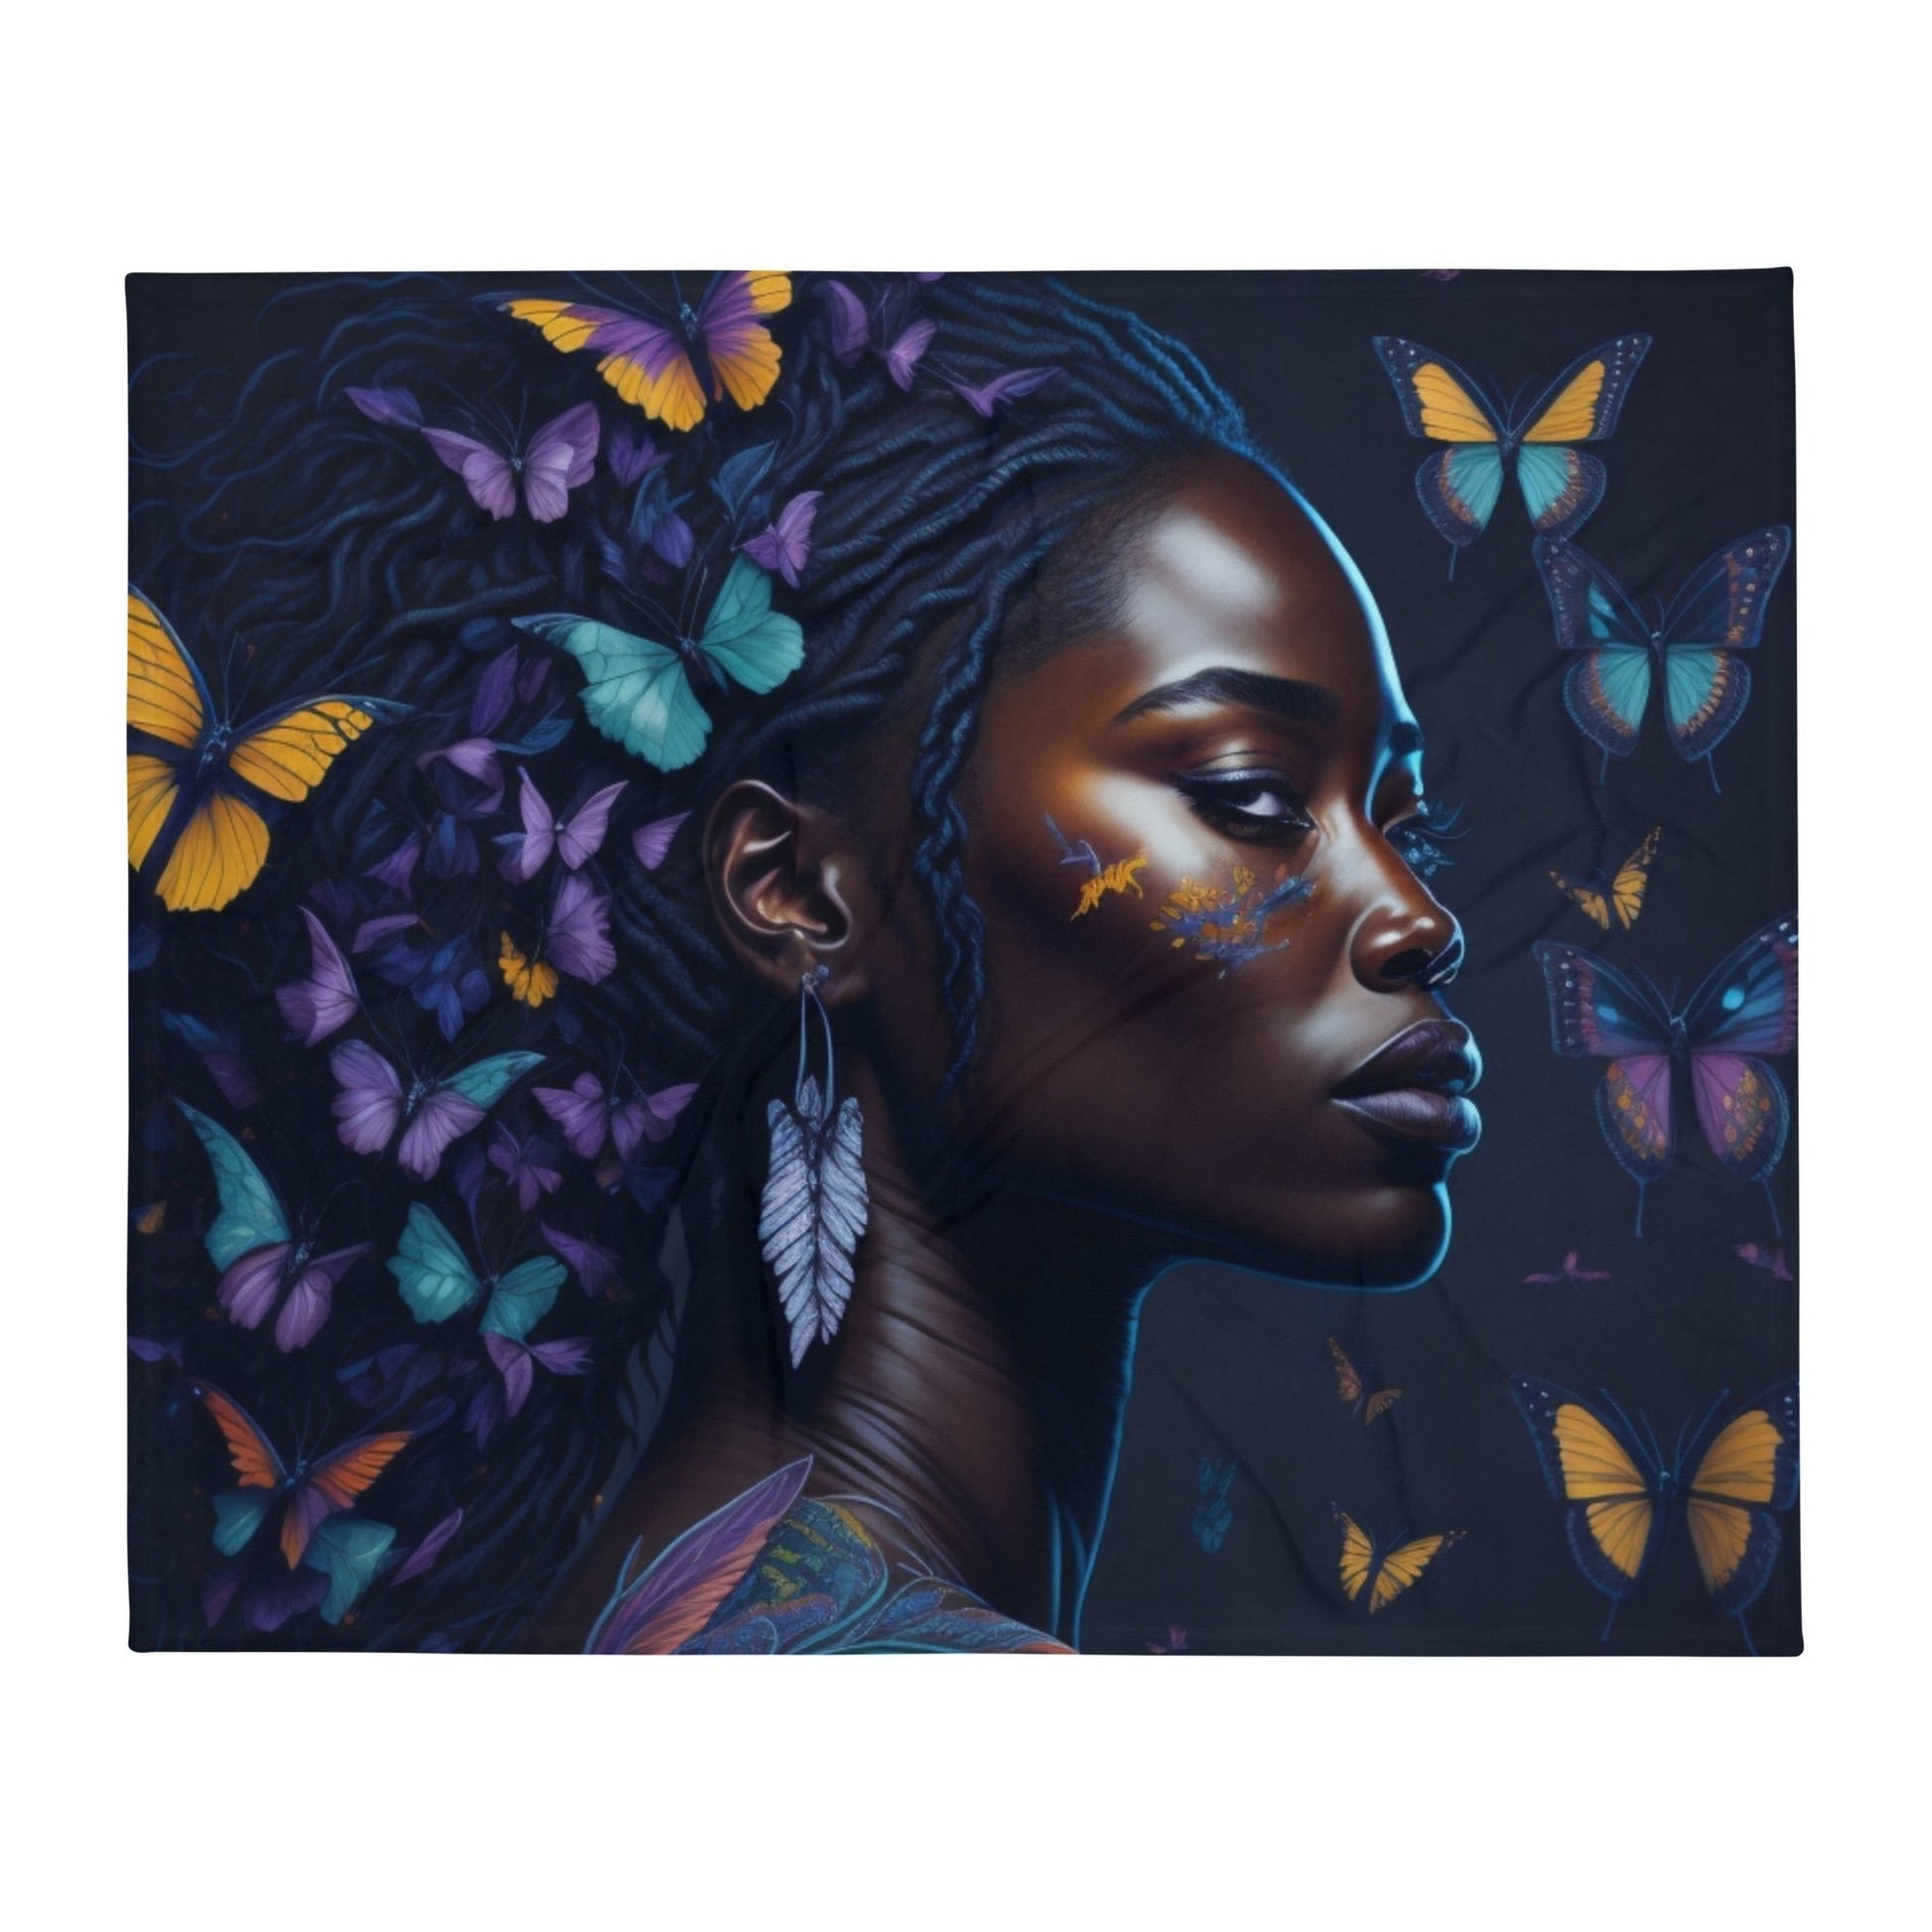 Graceful Wings: Portrait of an African American Woman with Fluttering Butterflies Throw Blanket-THROW BLANKET-50″×60″-Fluttering Dreams-mysticalcherry